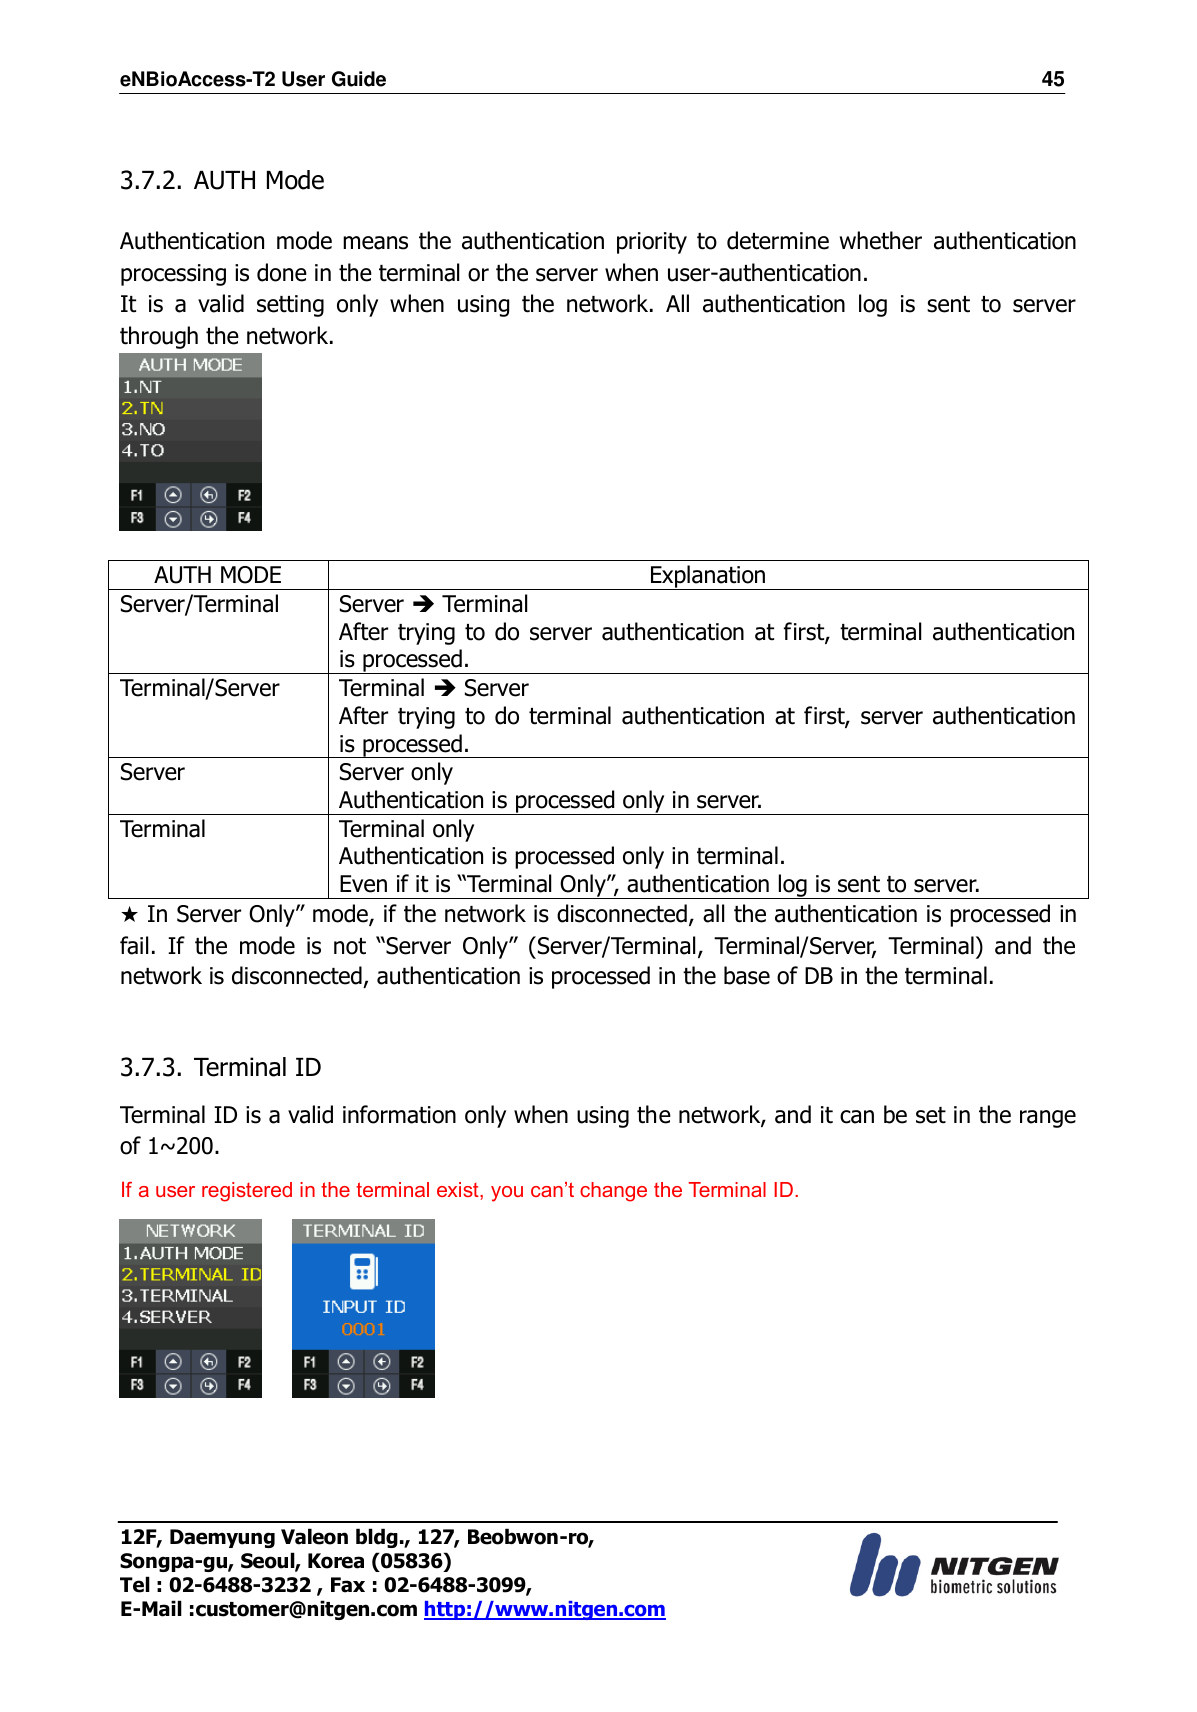 eNBioAccess-T2 User Guide                                                                    45 12F, Daemyung Valeon bldg., 127, Beobwon-ro, Songpa-gu, Seoul, Korea (05836) Tel : 02-6488-3232 , Fax : 02-6488-3099,   E-Mail :customer@nitgen.com http://www.nitgen.com   3.7.2. AUTH Mode  Authentication mode means  the authentication  priority to determine whether  authentication processing is done in the terminal or the server when user-authentication. It  is  a  valid  setting  only  when  using  the  network.  All  authentication  log  is  sent  to  server through the network.   AUTH MODE Explanation Server/Terminal Server  Terminal After trying to do server authentication at first, terminal authentication is processed. Terminal/Server Terminal  Server After trying to do terminal authentication at first, server authentication is processed. Server Server only Authentication is processed only in server. Terminal Terminal only Authentication is processed only in terminal. Even if it is “Terminal Only”, authentication log is sent to server.   ★ In Server Only” mode, if the network is disconnected, all the authentication is processed in fail.  If  the  mode  is  not  “Server  Only”  (Server/Terminal,  Terminal/Server,  Terminal)  and  the network is disconnected, authentication is processed in the base of DB in the terminal.  3.7.3. Terminal ID    Terminal ID is a valid information only when using the network, and it can be set in the range of 1~200. If a user registered in the terminal exist, you can’t change the Terminal ID.        